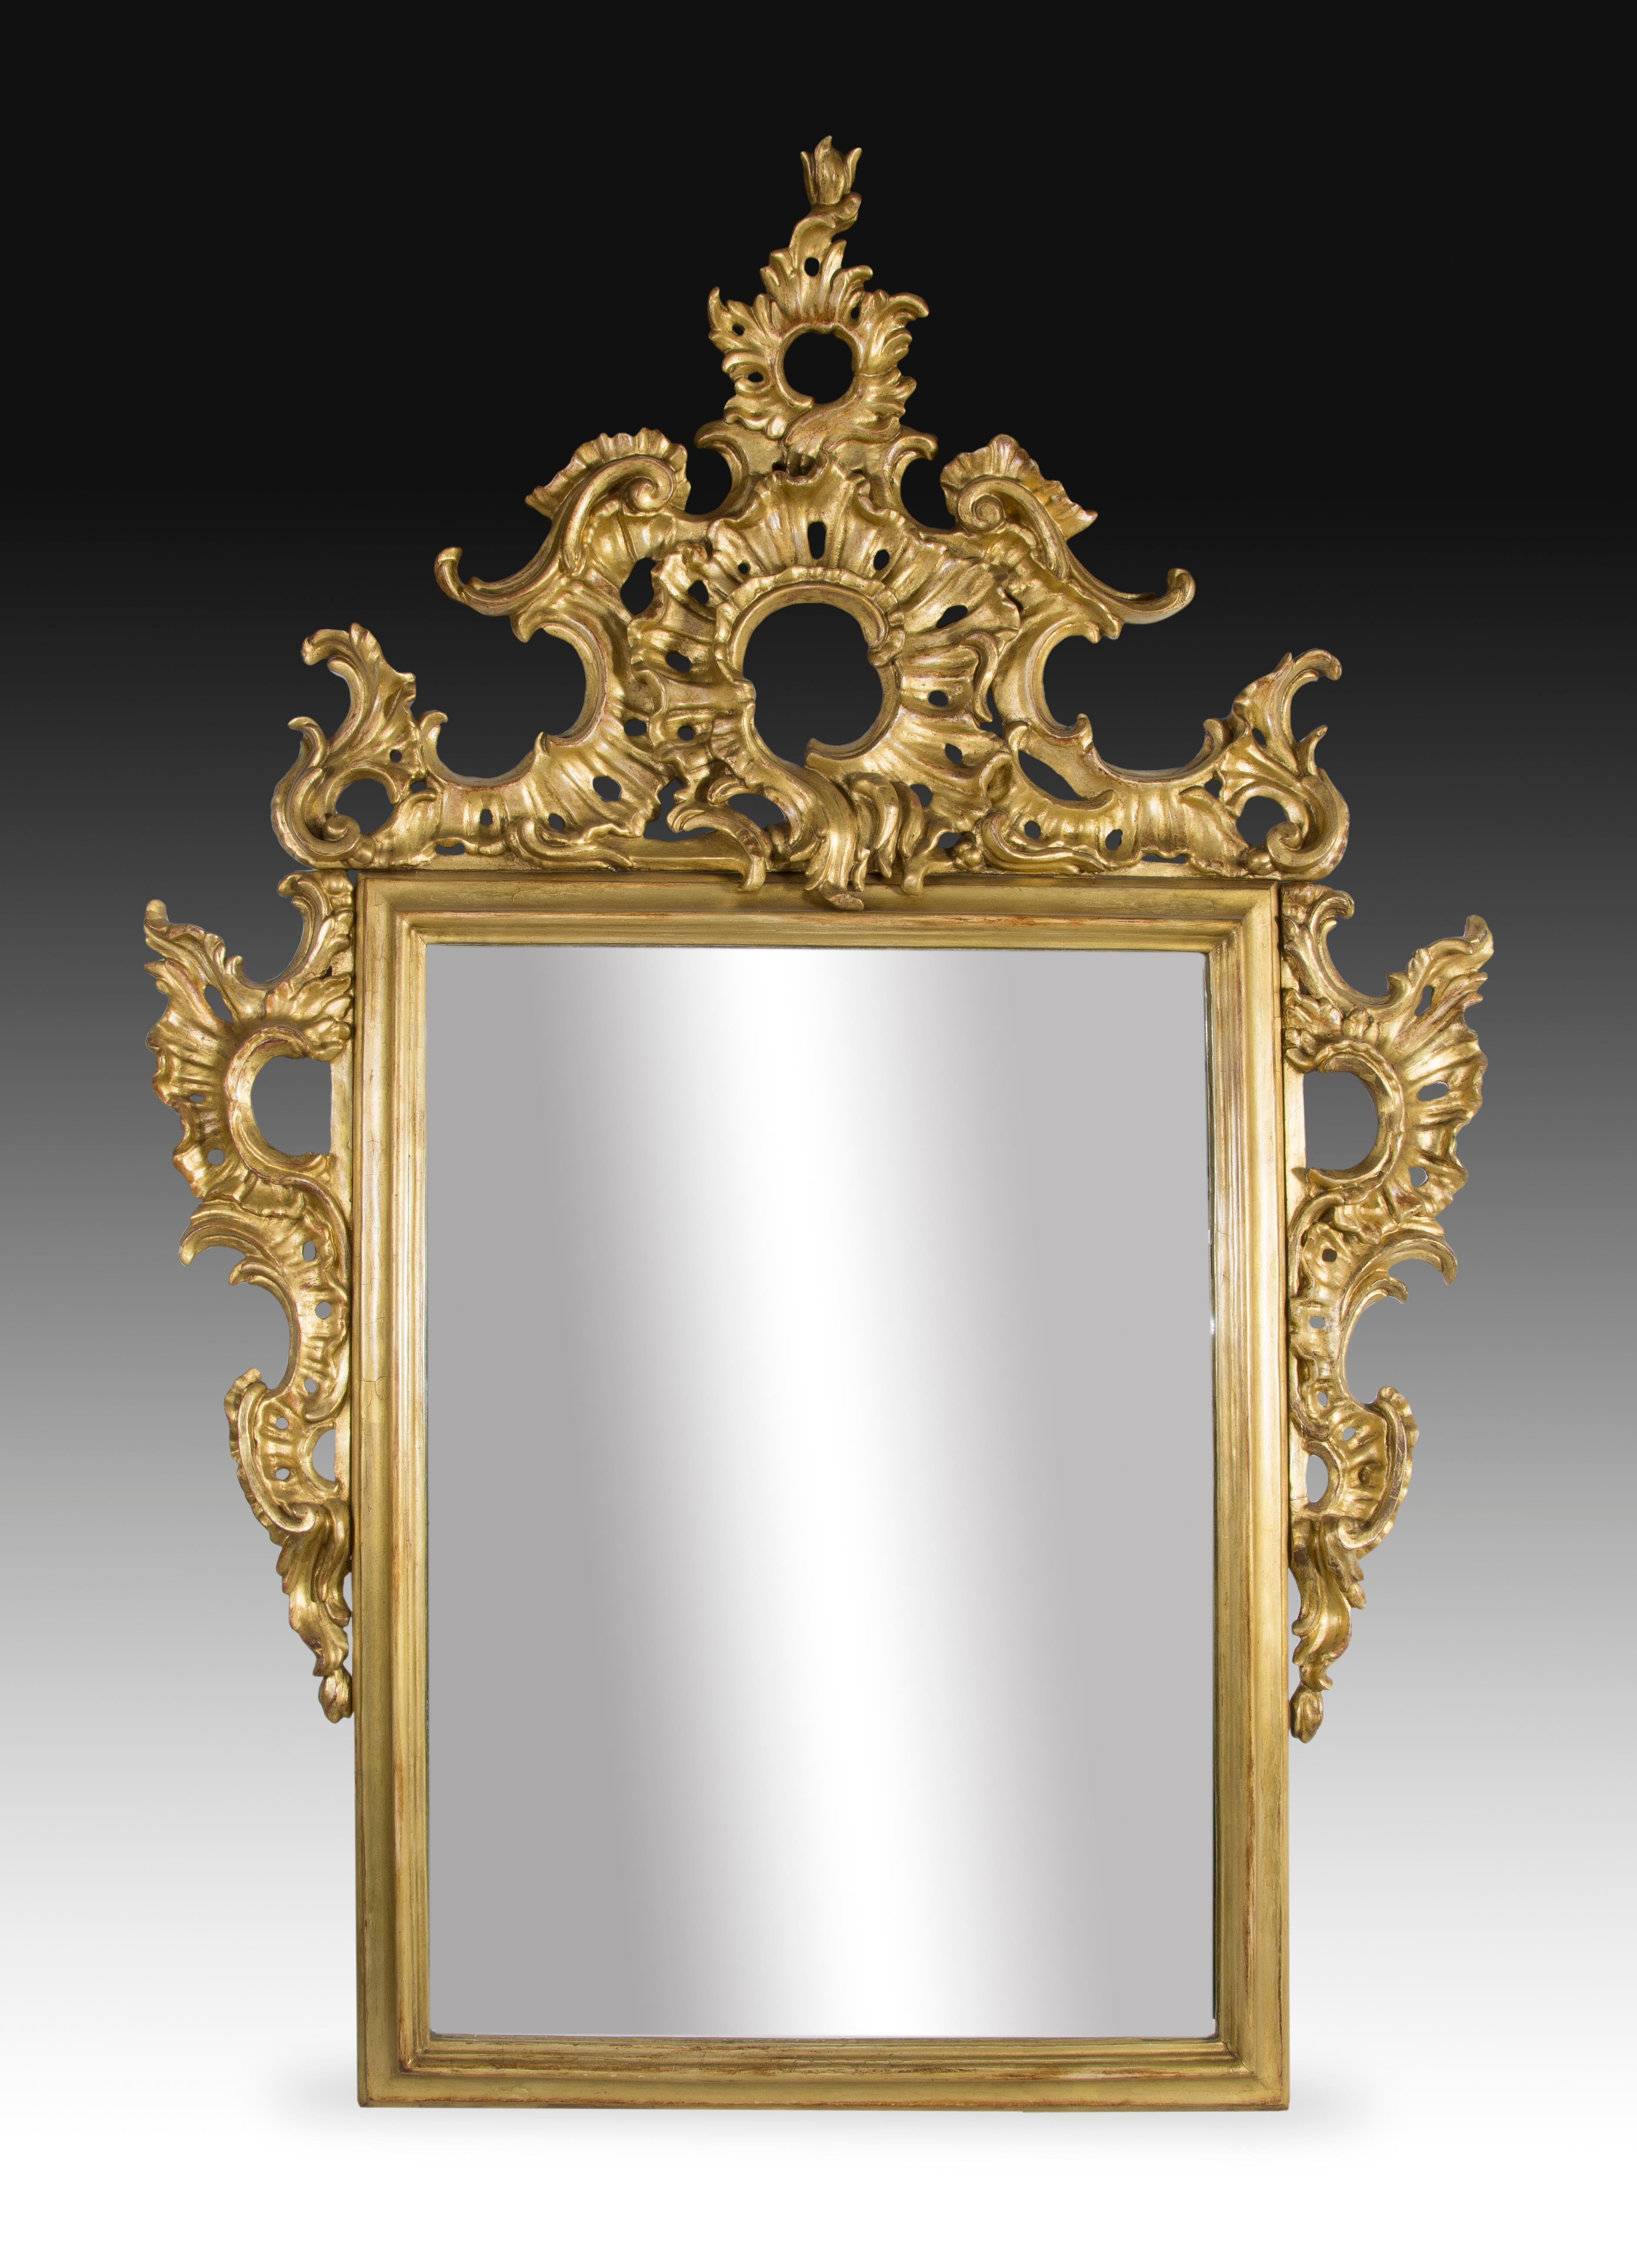 Cornucopia, carved and gilded wood, 19th century.
Rectangular mirror with the frame highlighted by a cupete that extends along the sides. This one has been formed with scrolls and rockets, inspired directly by 18th century examples that follow this